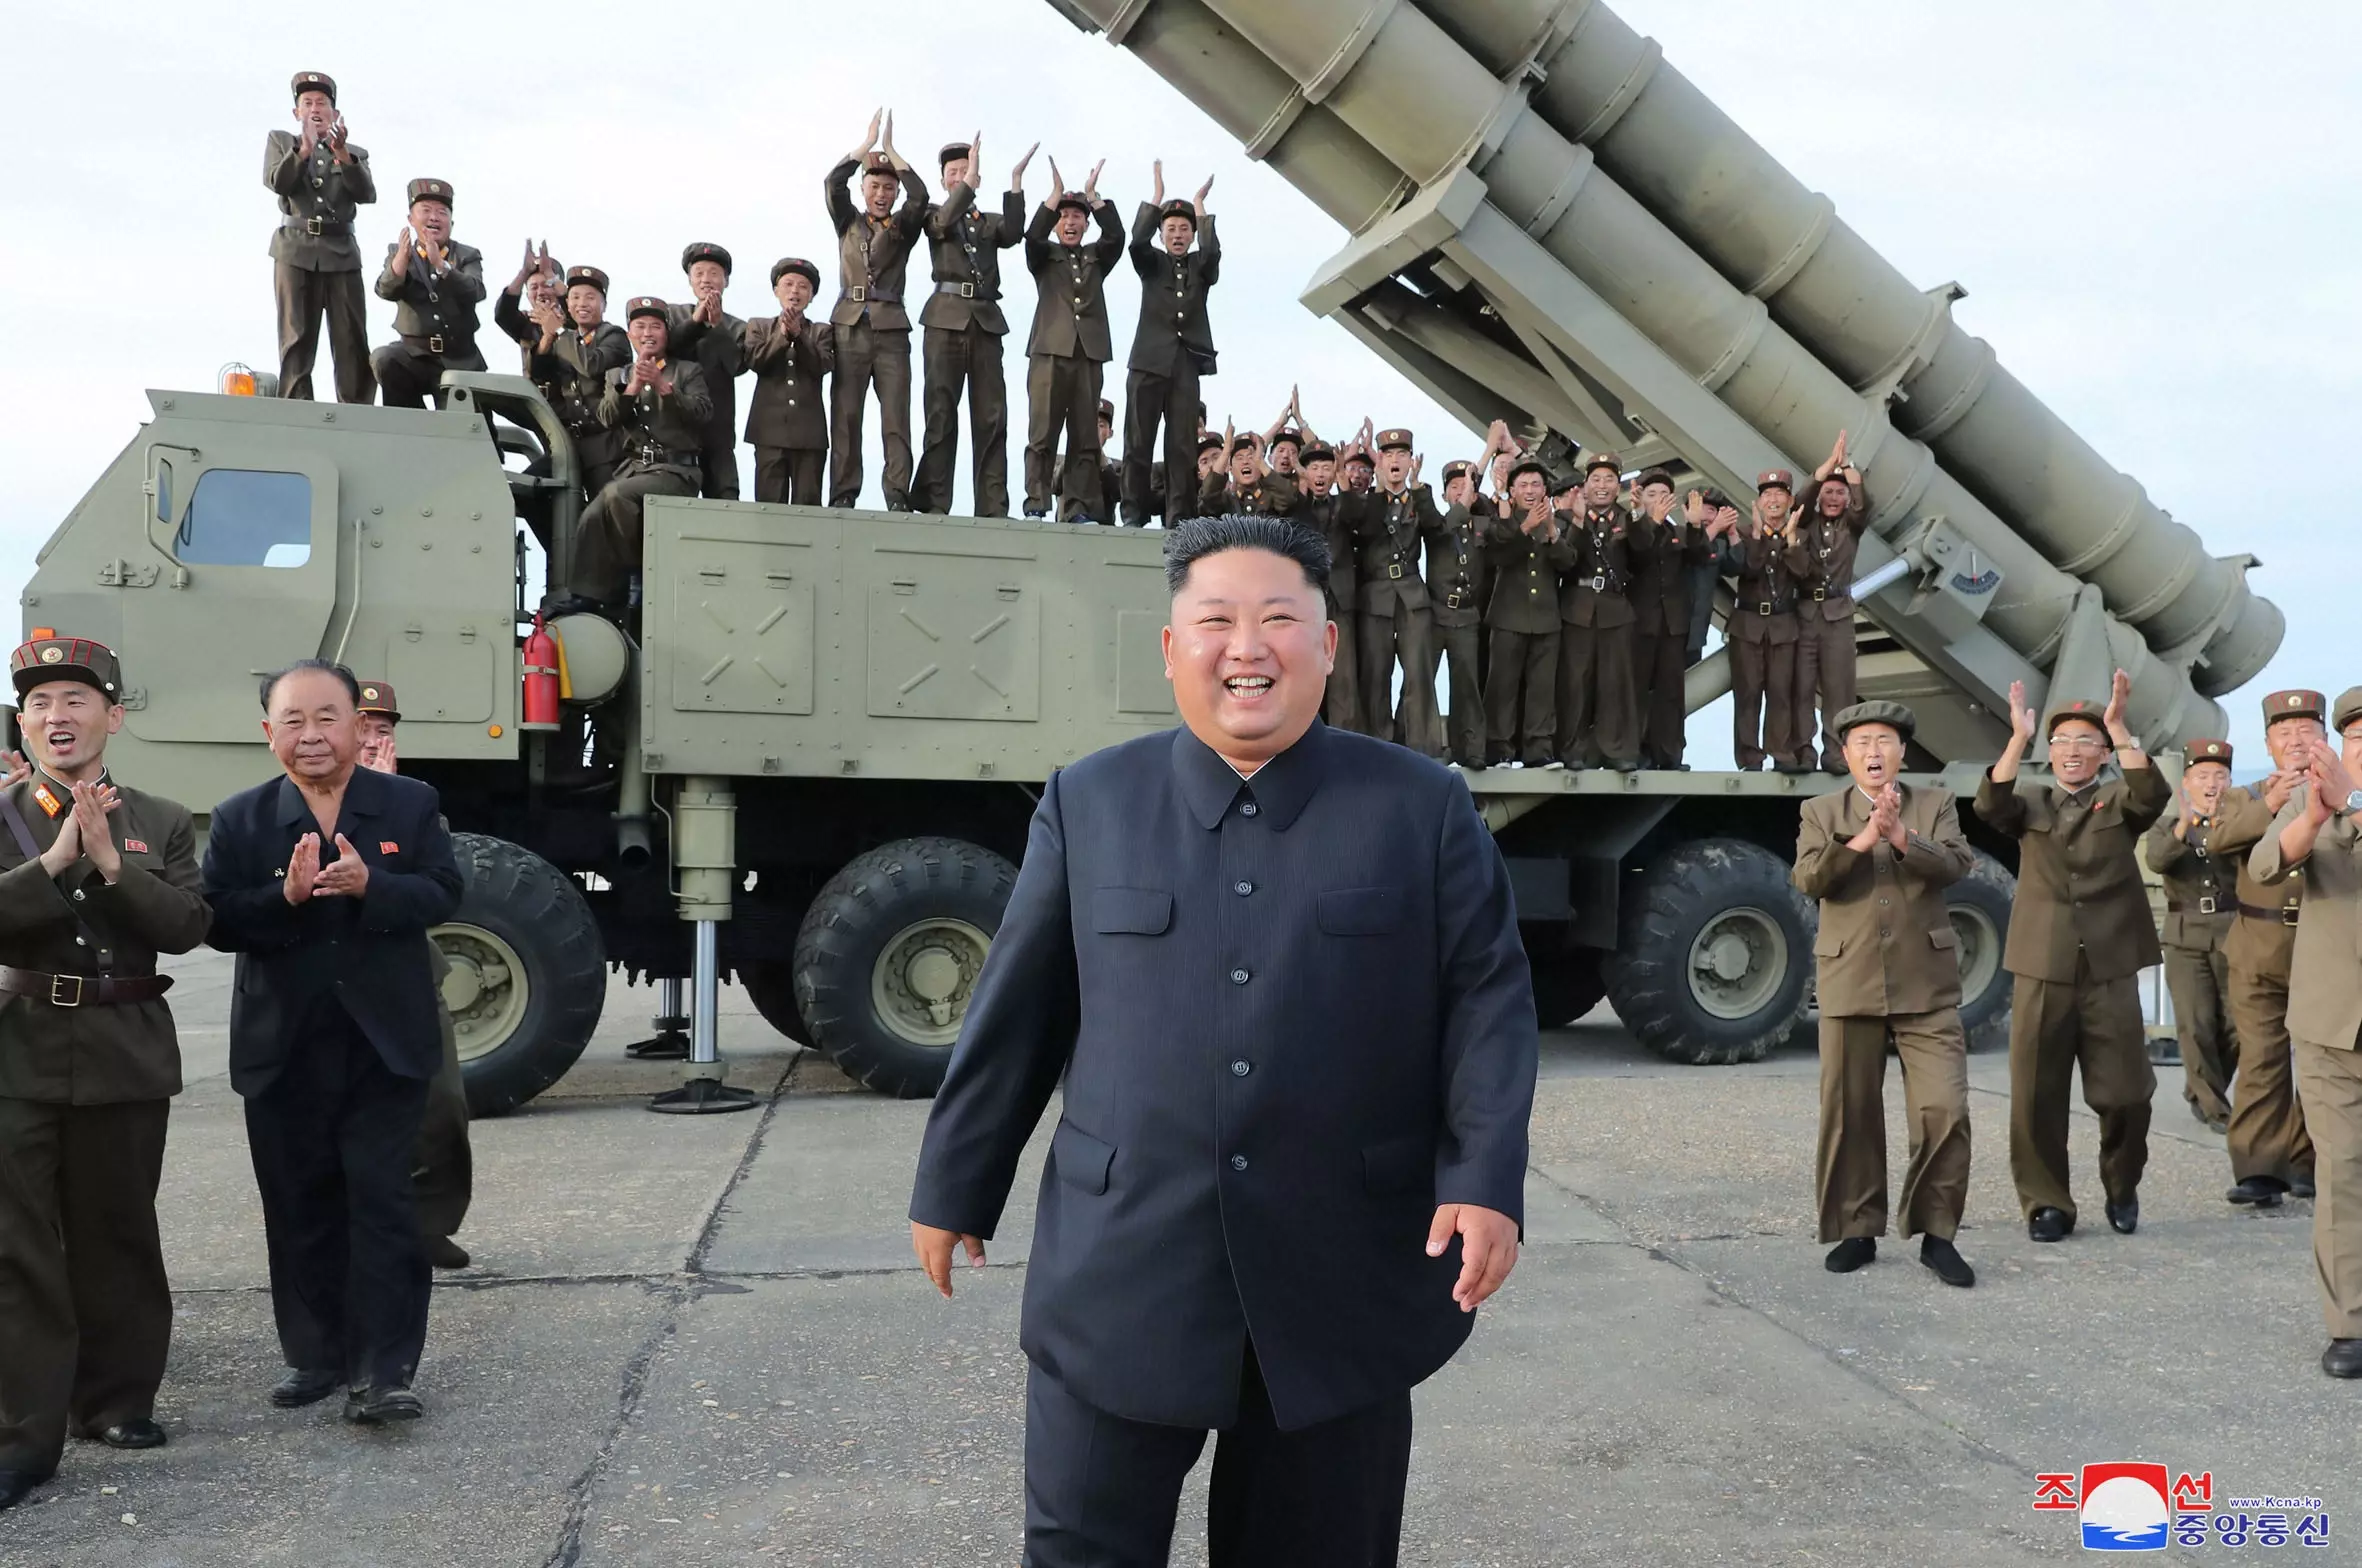 North Koreas Kim threatens use of nukes as he praises troops for long-range missile launch